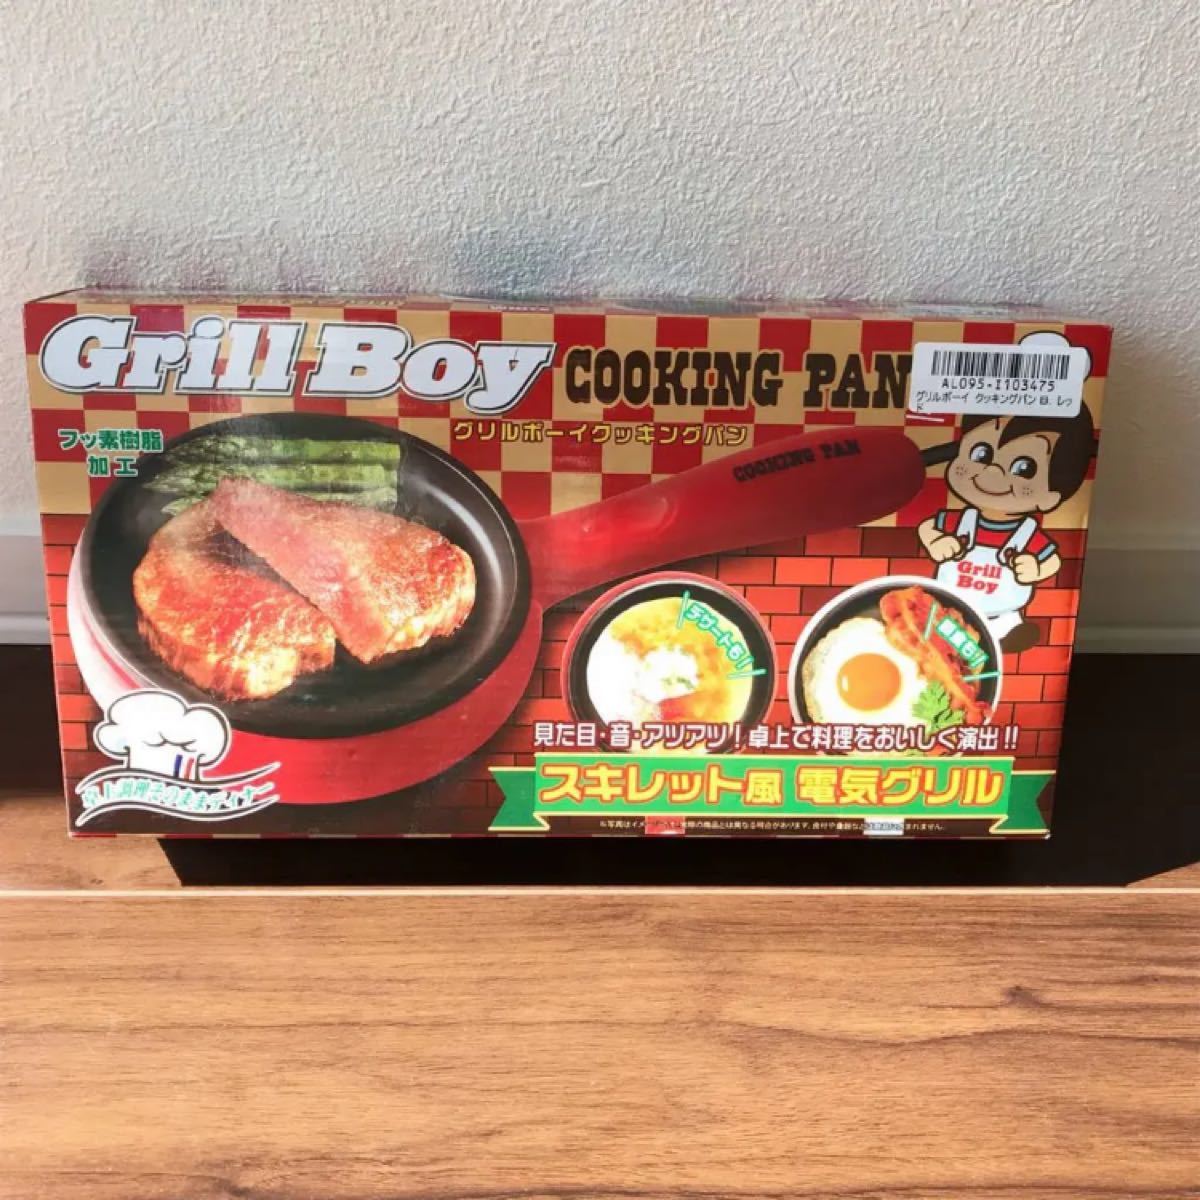 Grill Boy COOKING PAN